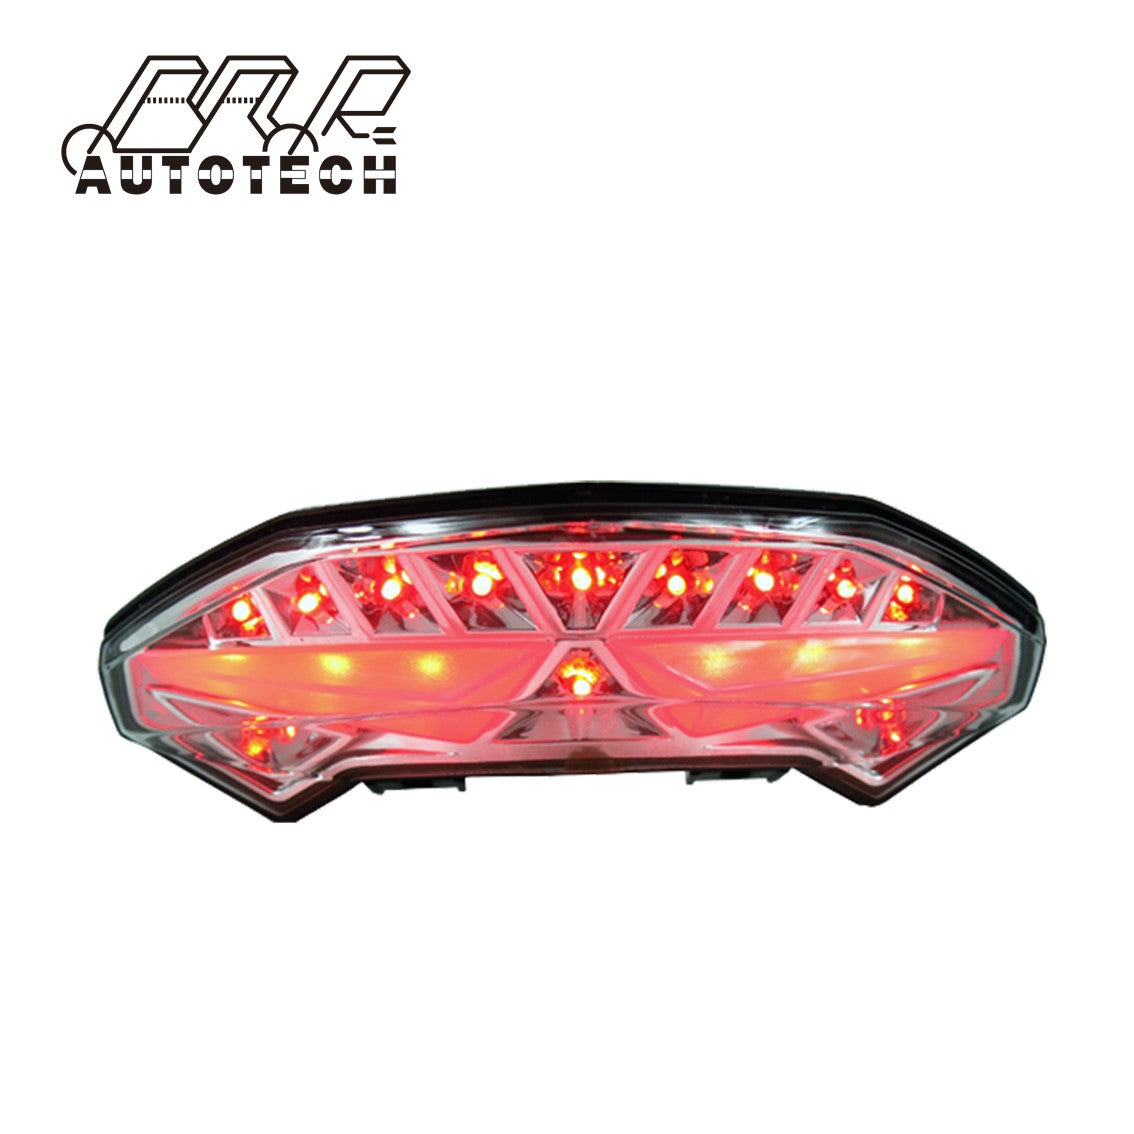 Motorcycle led tail lights For DUCATI MULTISTRADA 1200 2010-2014